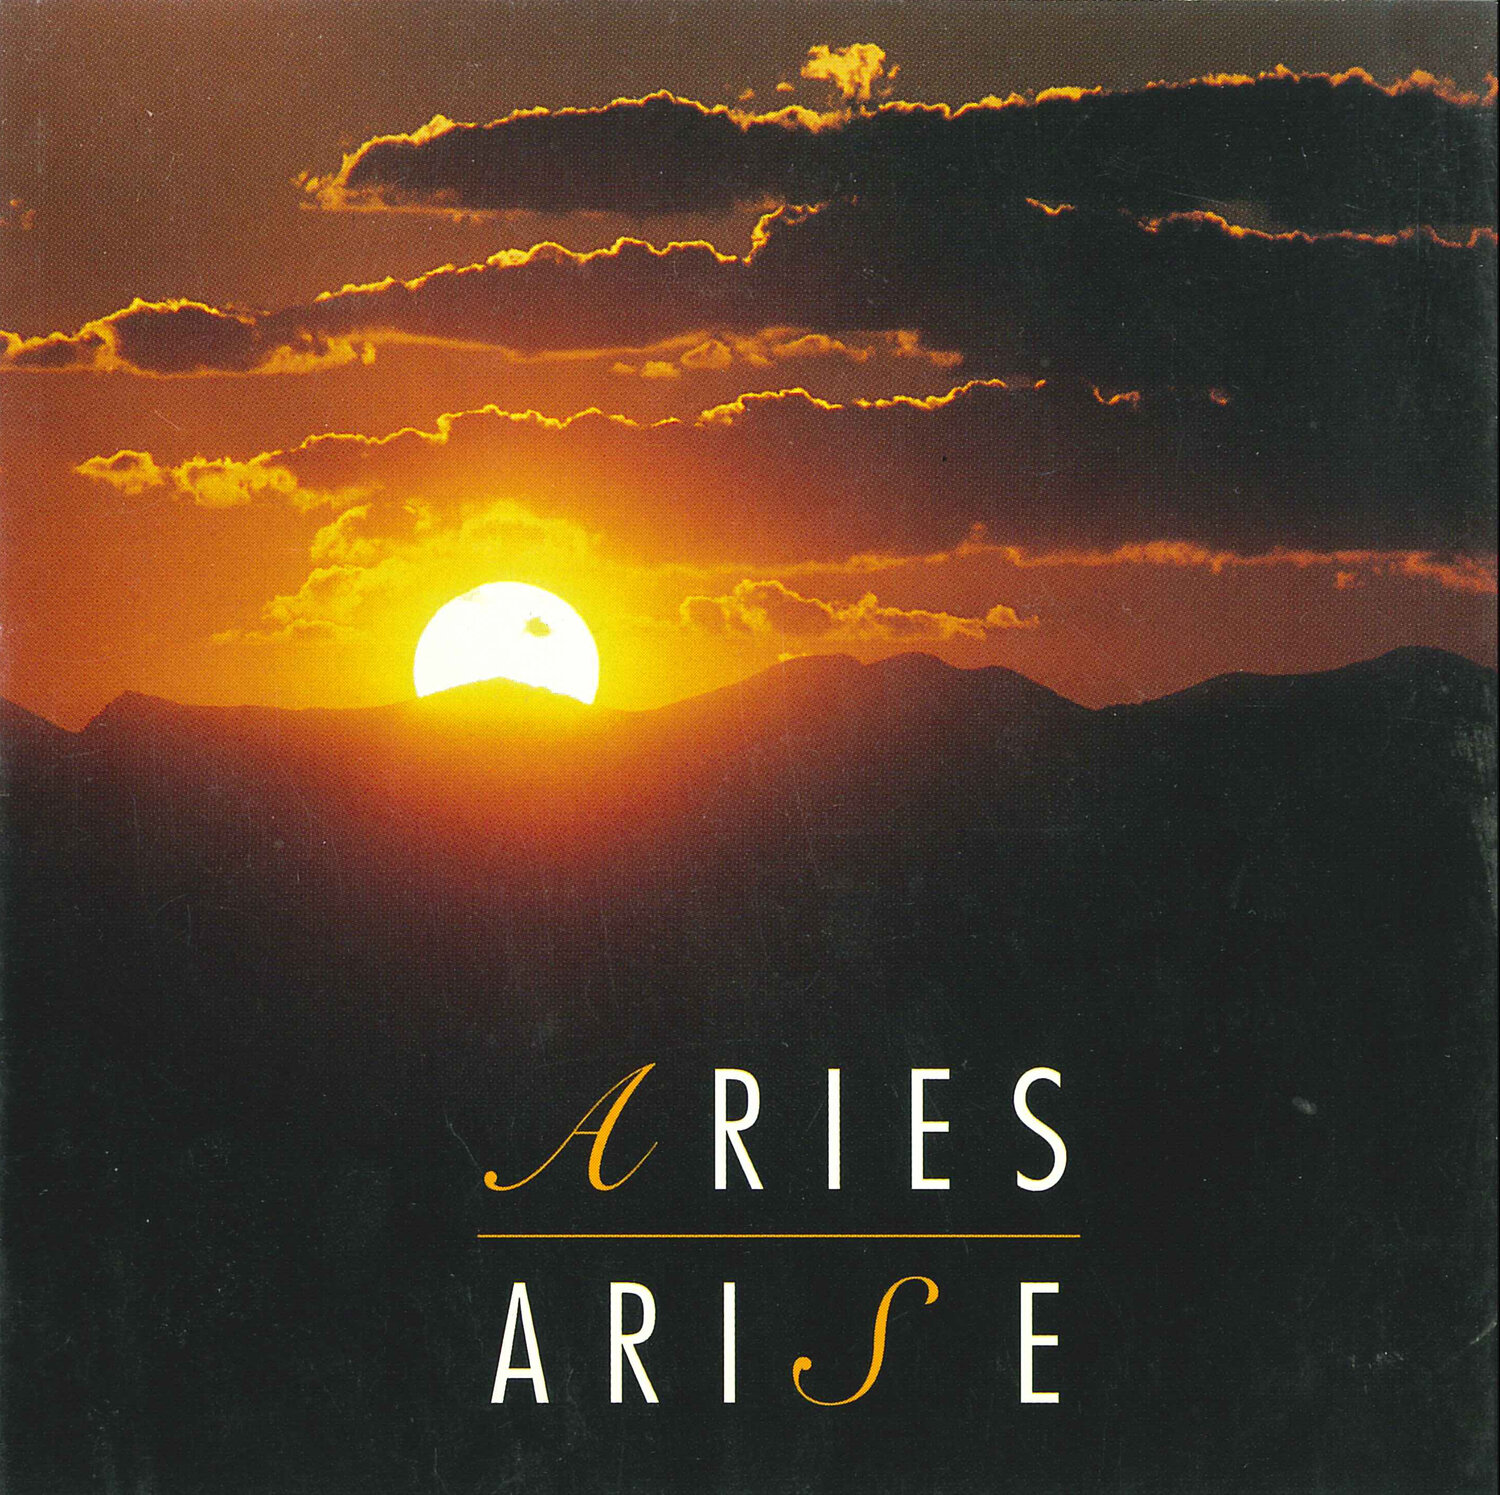 Artistic collaboration with Aries Arise